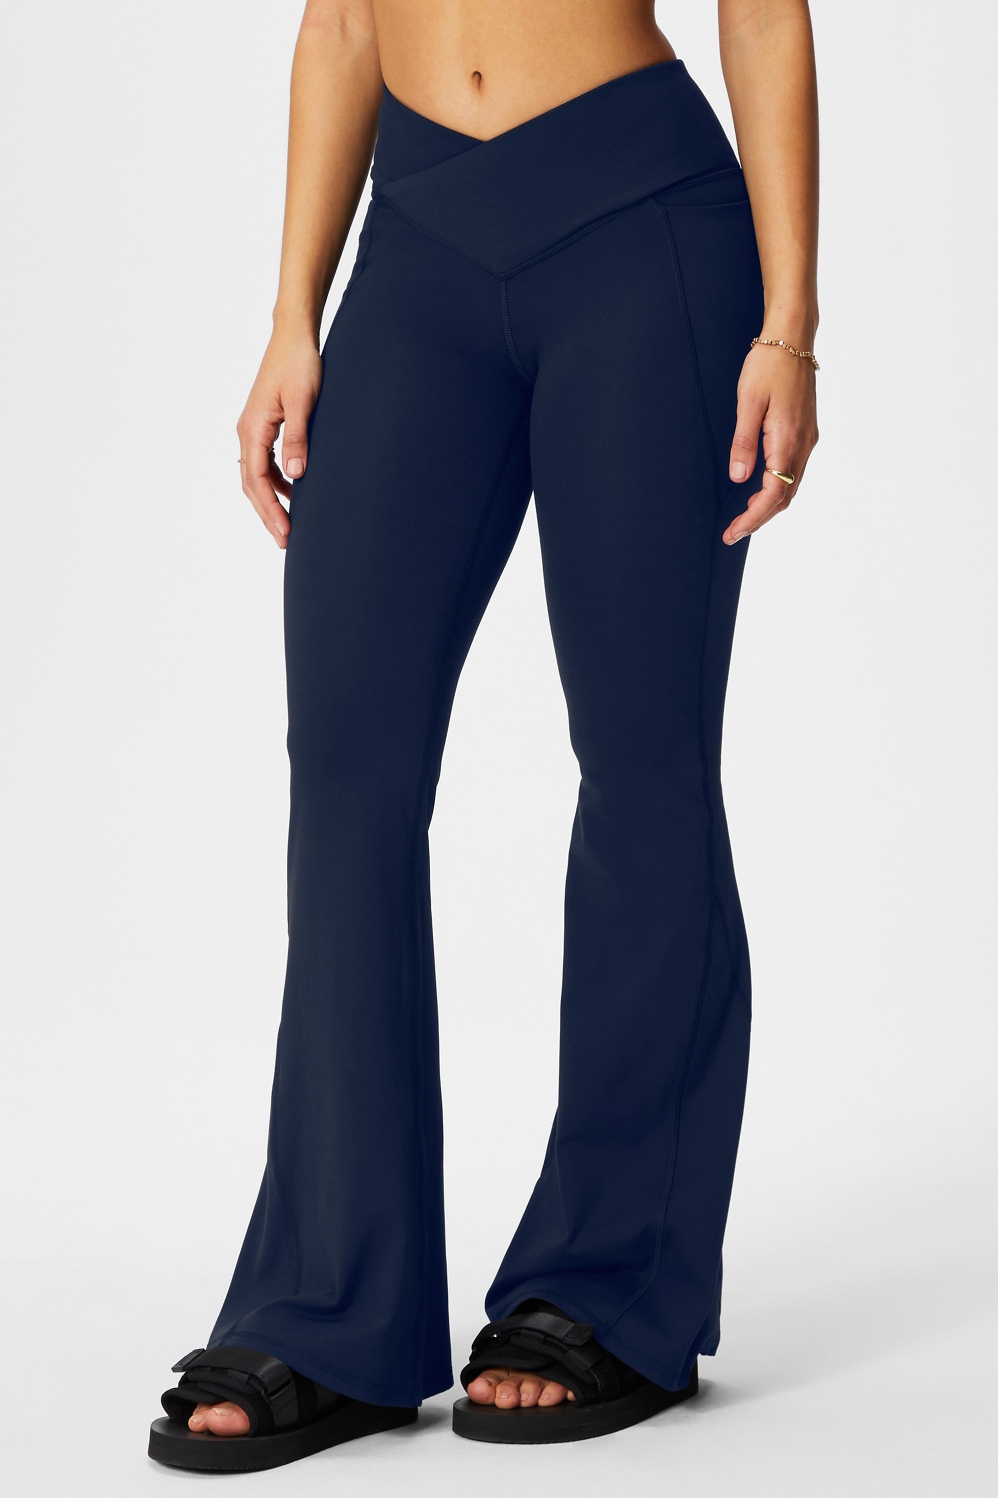  NTAKN Women's Flare Yoga Pants-Crossover High Waisted